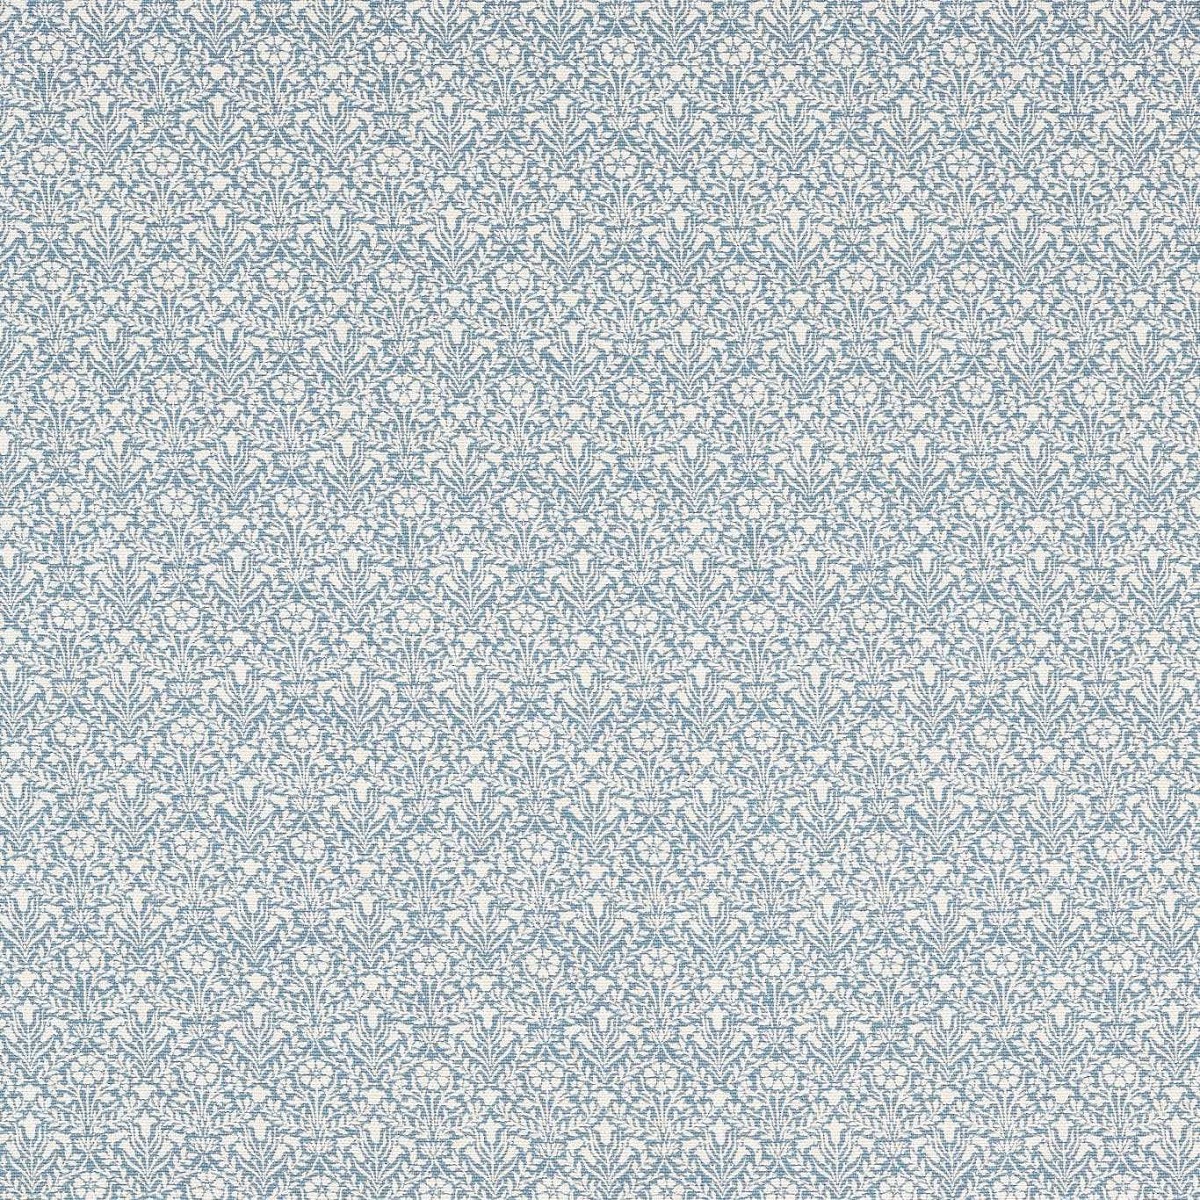 Bellflowers Weave Mineral Blue Fabric by William Morris & Co.